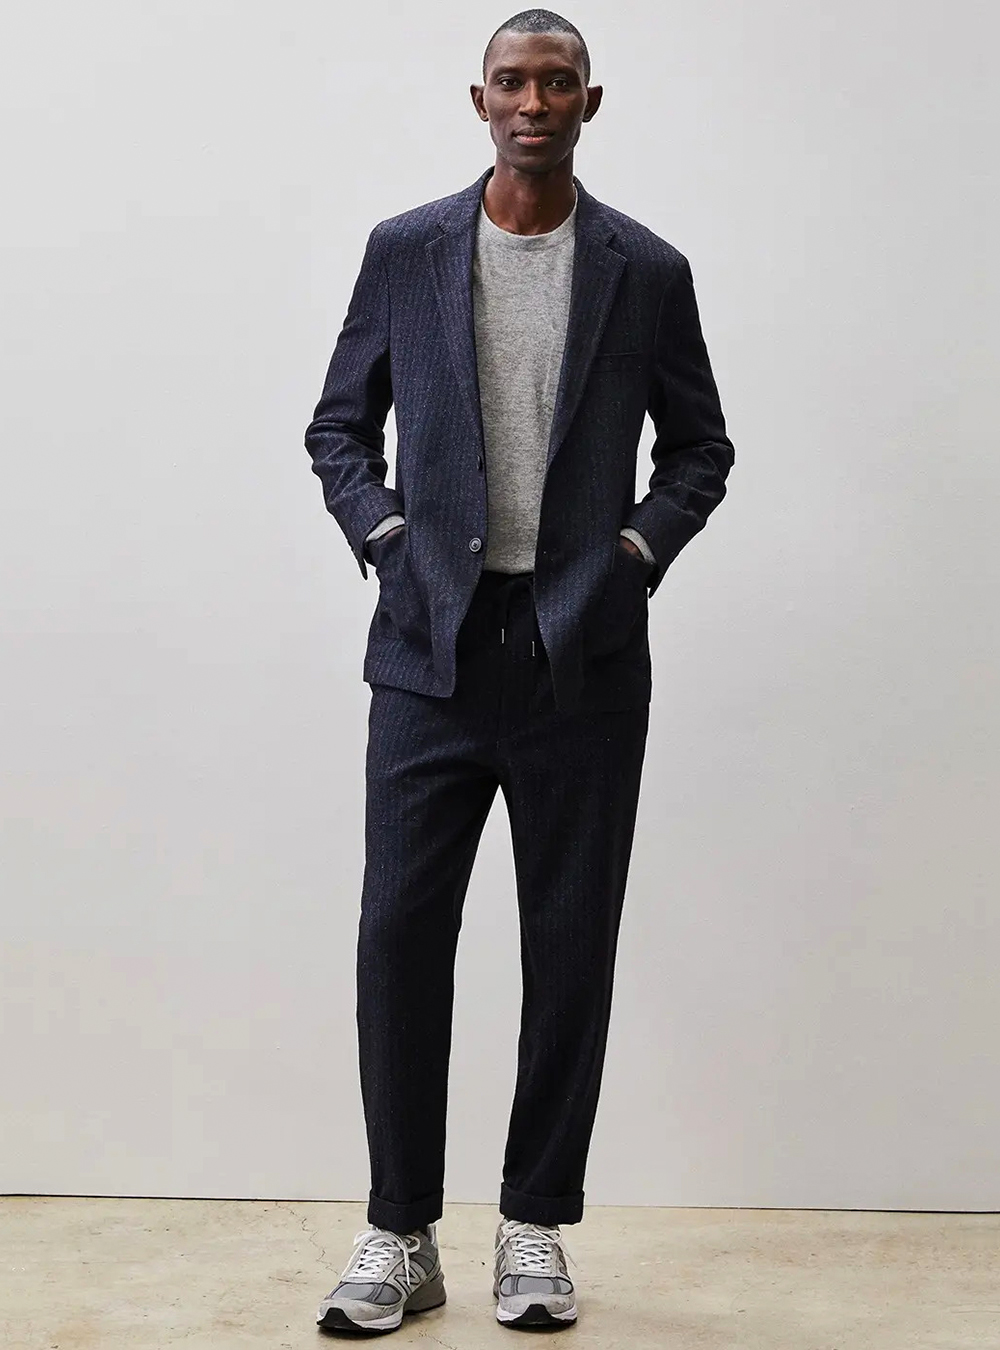 Navy blue pinstripe suit, grey t-shirt, and grey runners